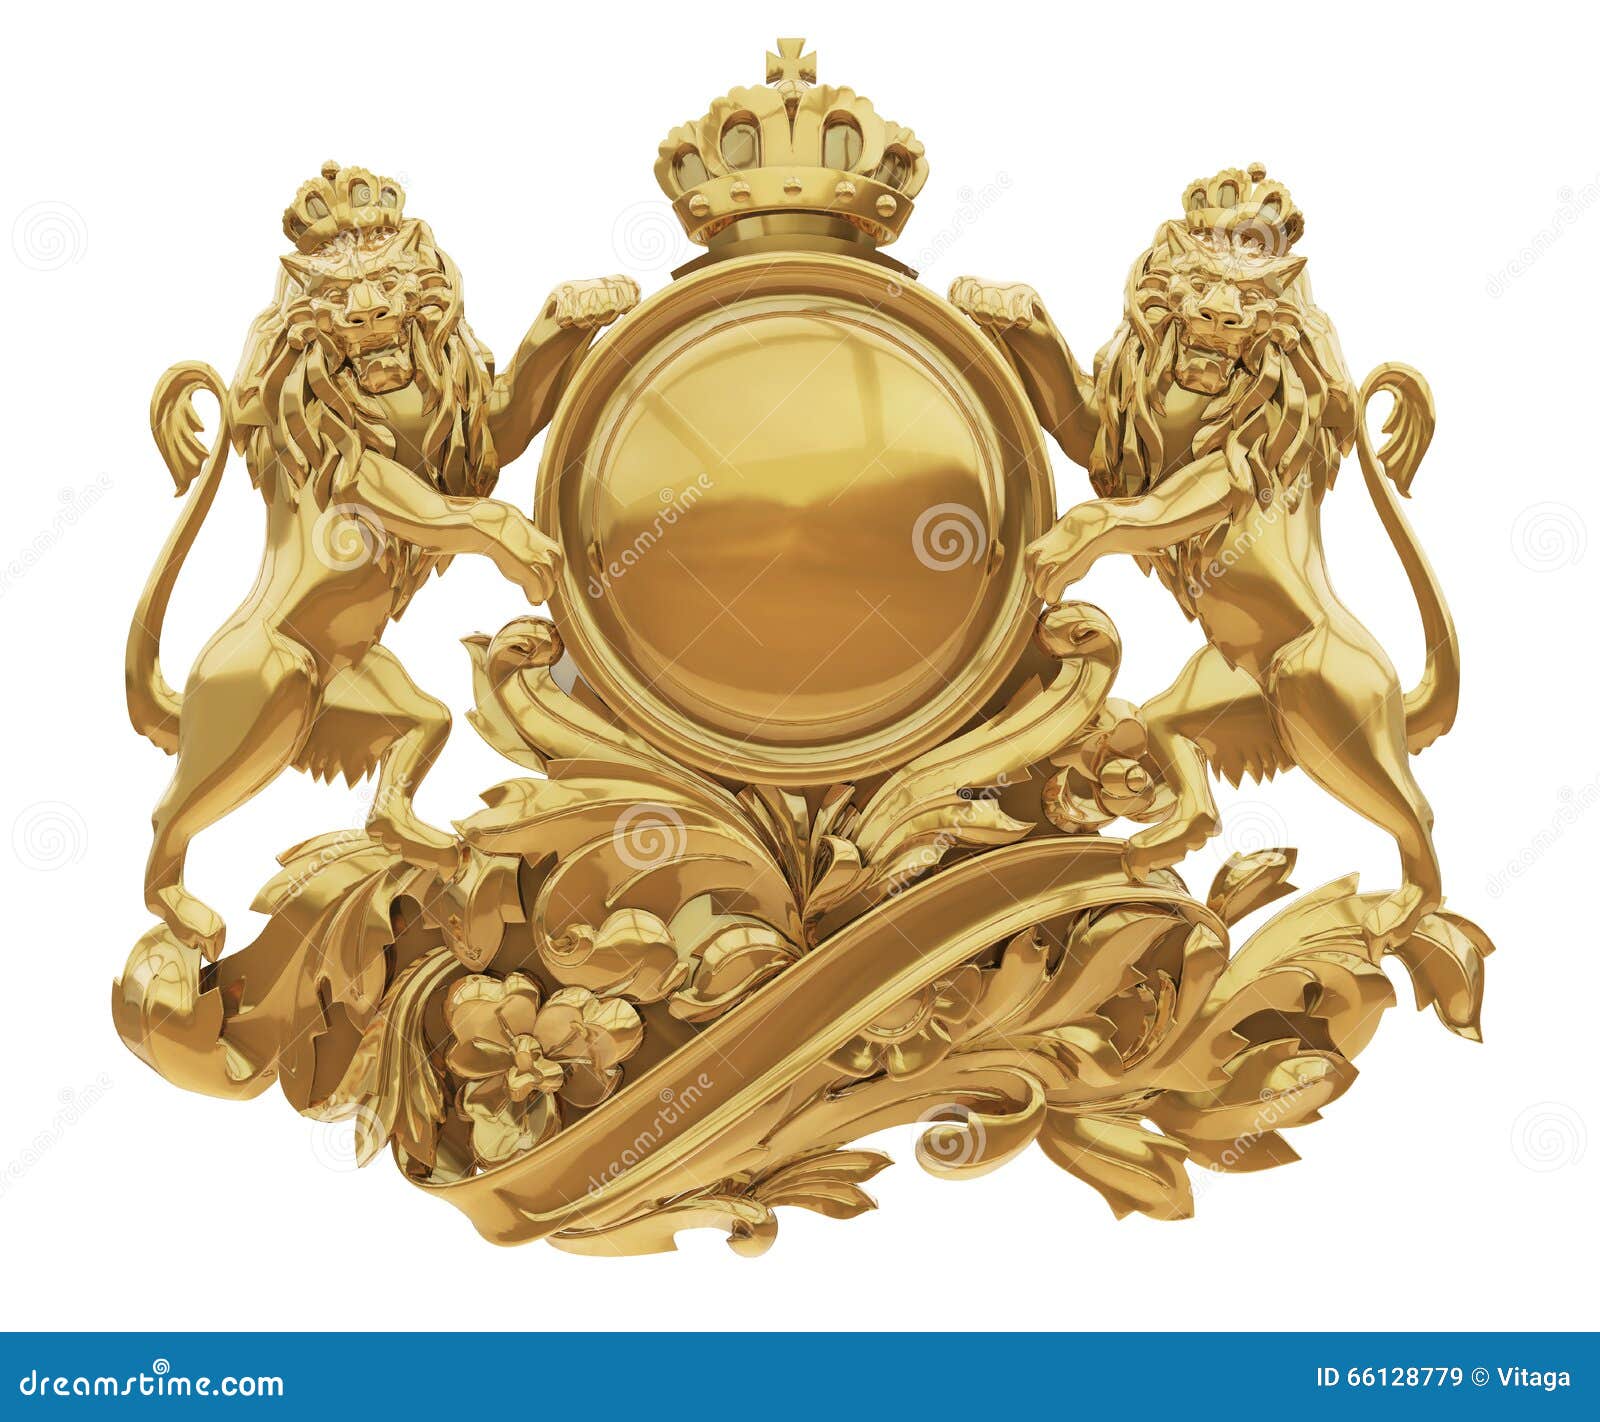 old golden coat of arms with lions isolate